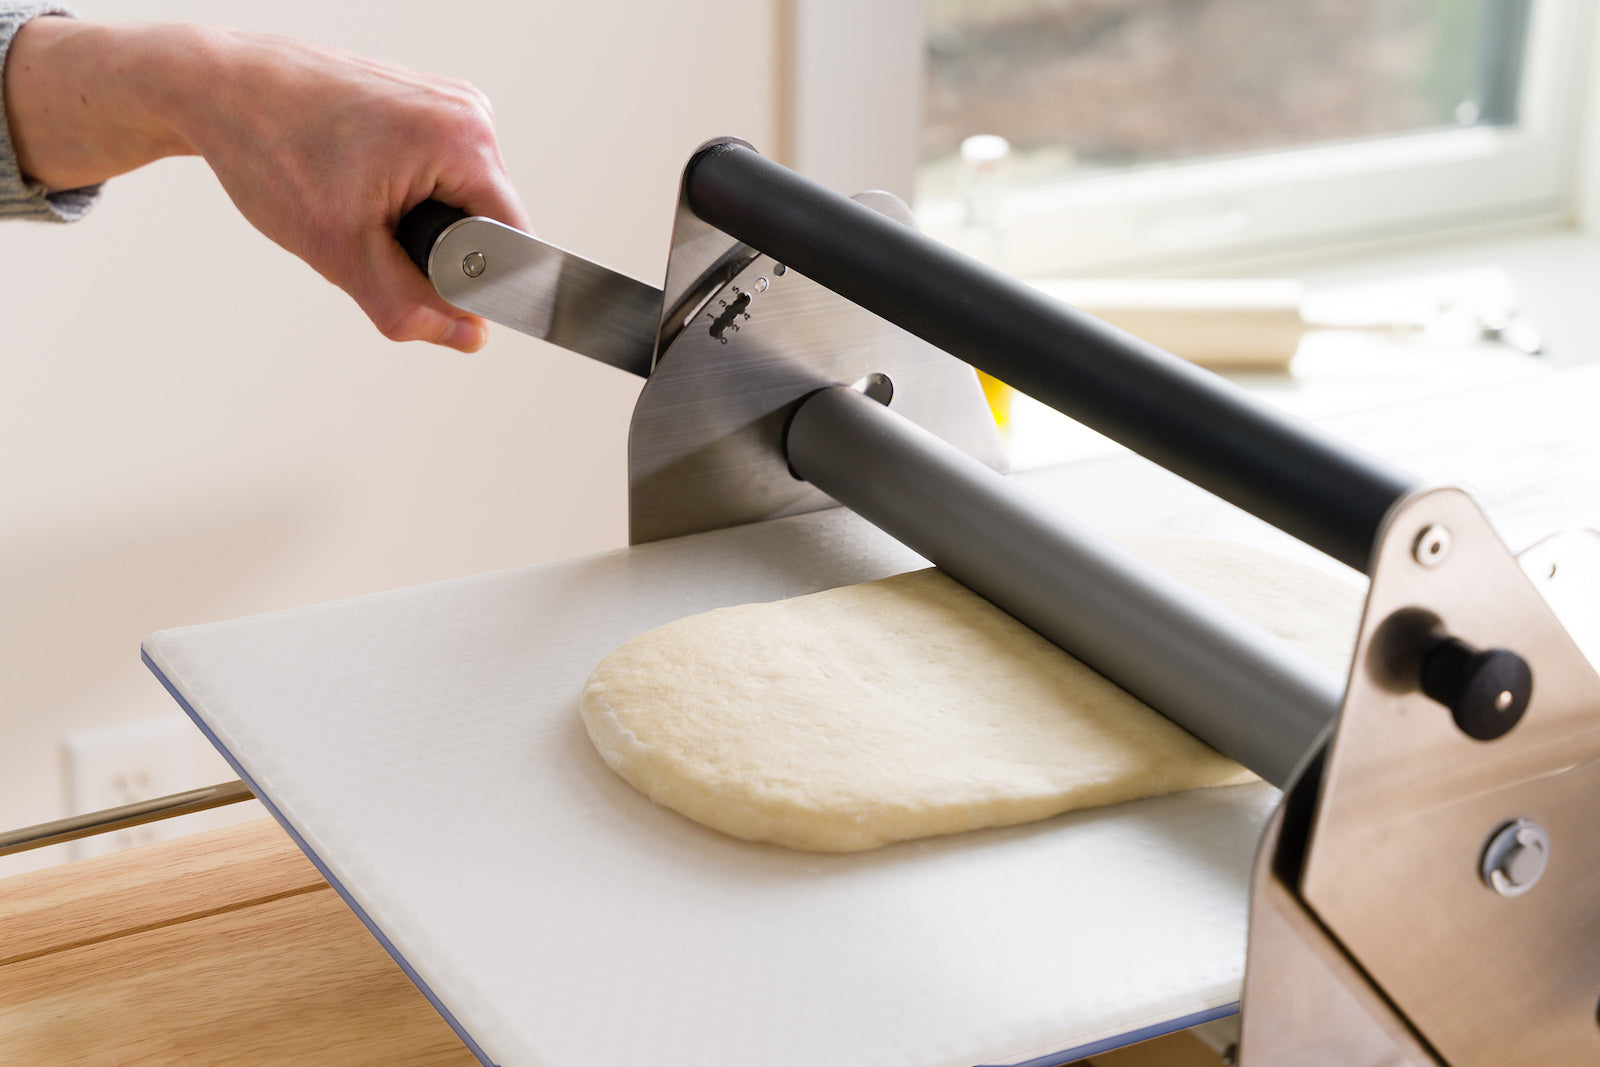  C230 - Pasta Dough Sheeter With Built-In Cutters